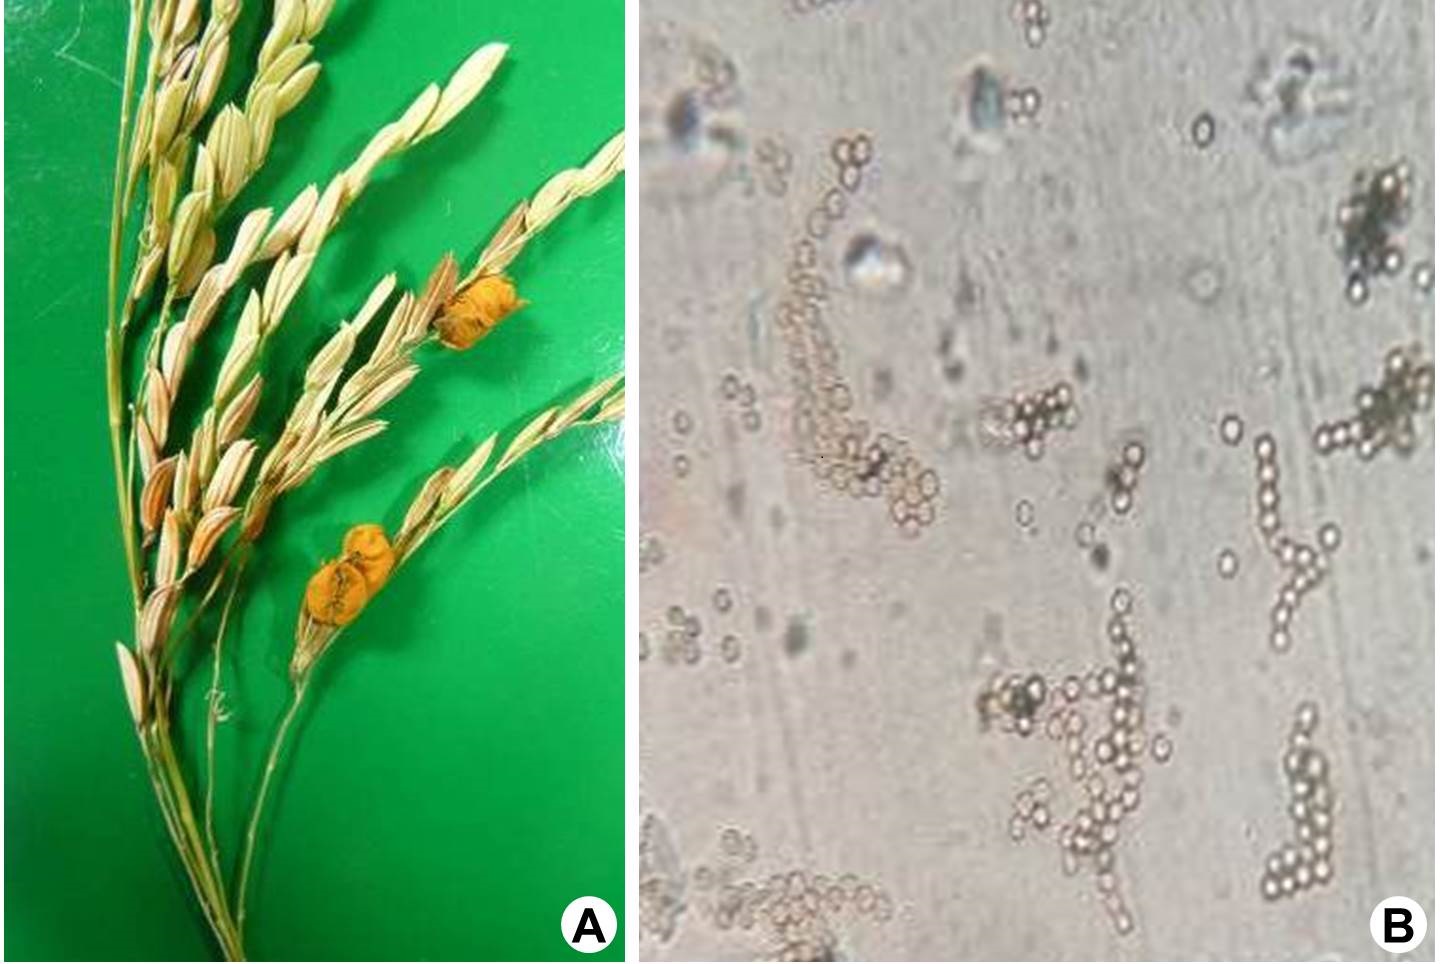 Symptoms and signs of false smut caused by Ustilaginoidea virens (Cooke) Takah. in rice panicle: A, Spore galls on panicle; B, Chlamydospores.